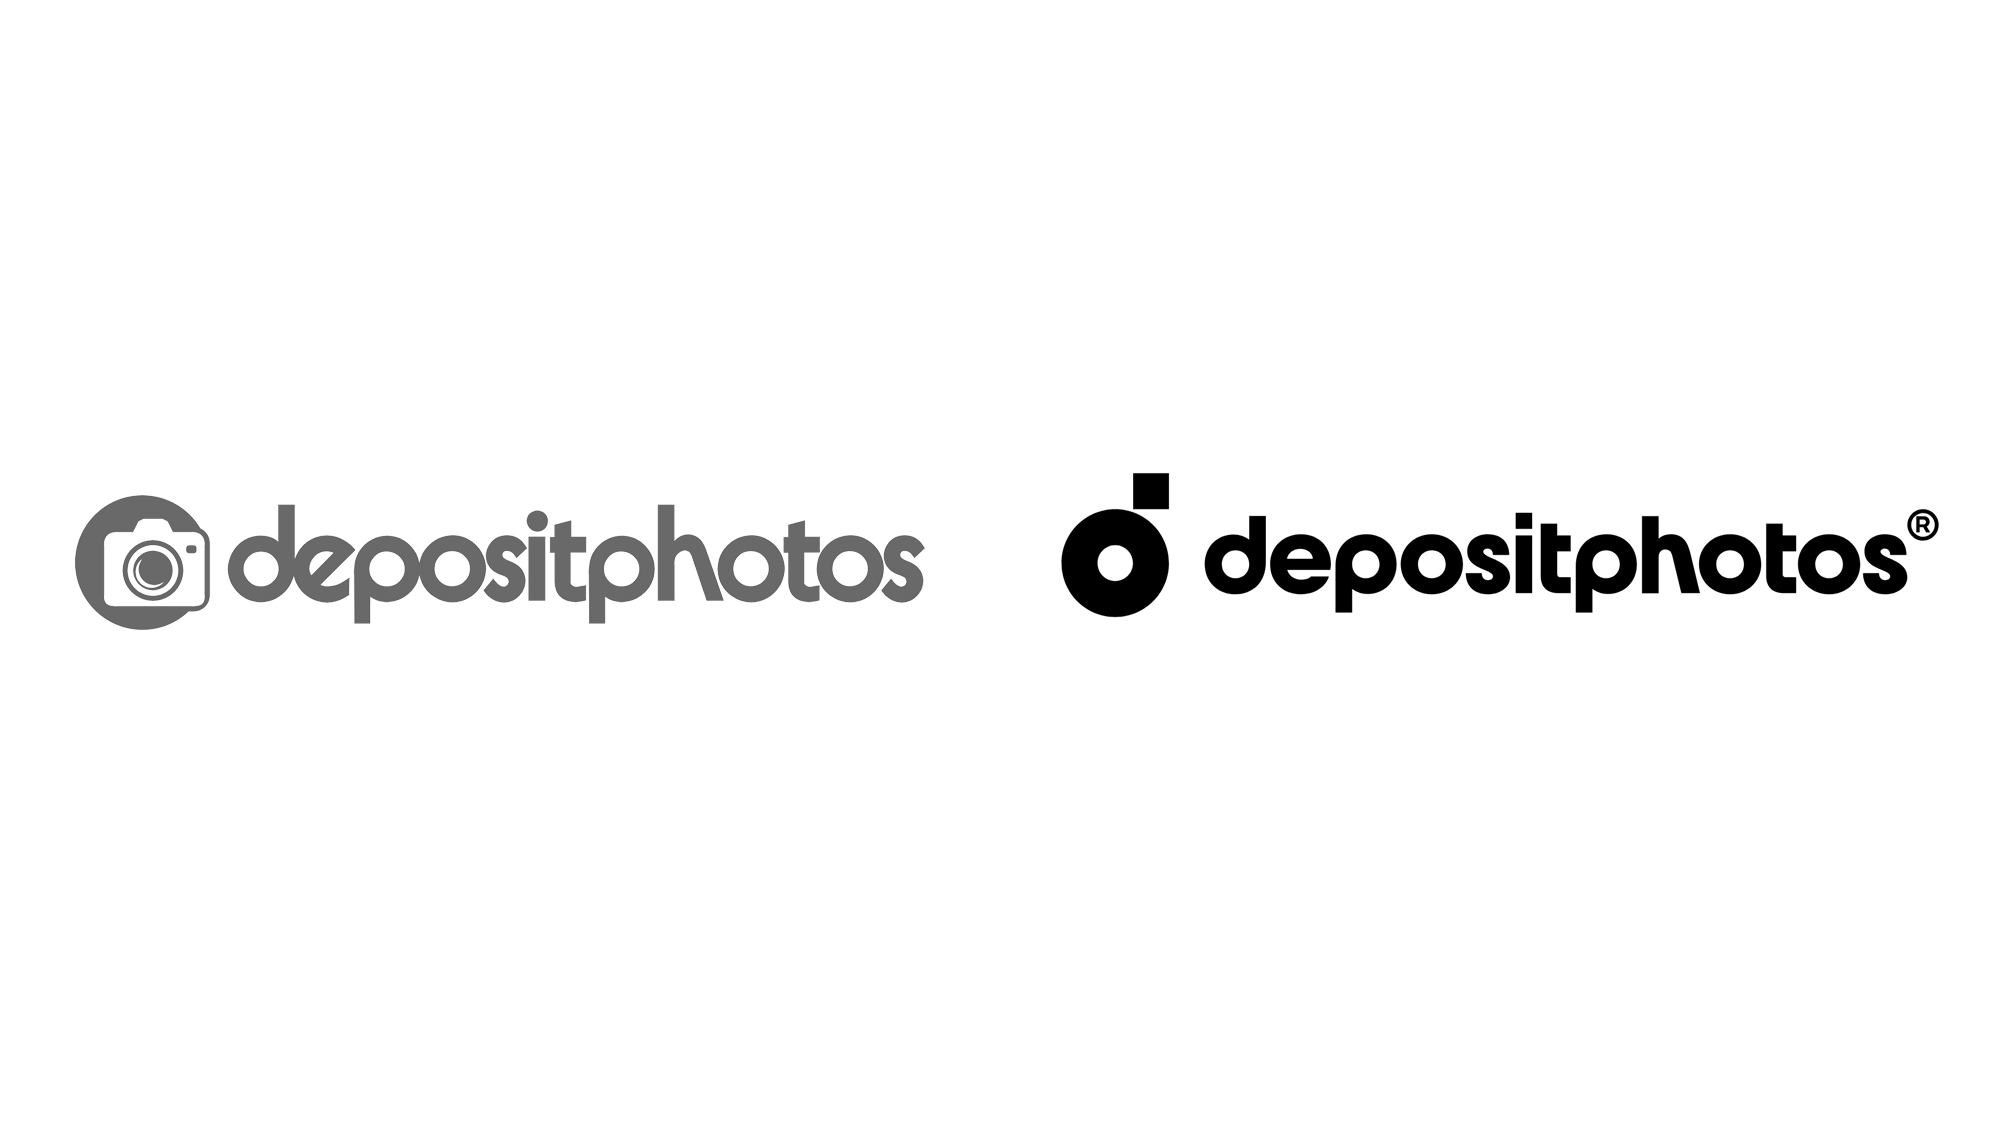 minimalist logo before and after